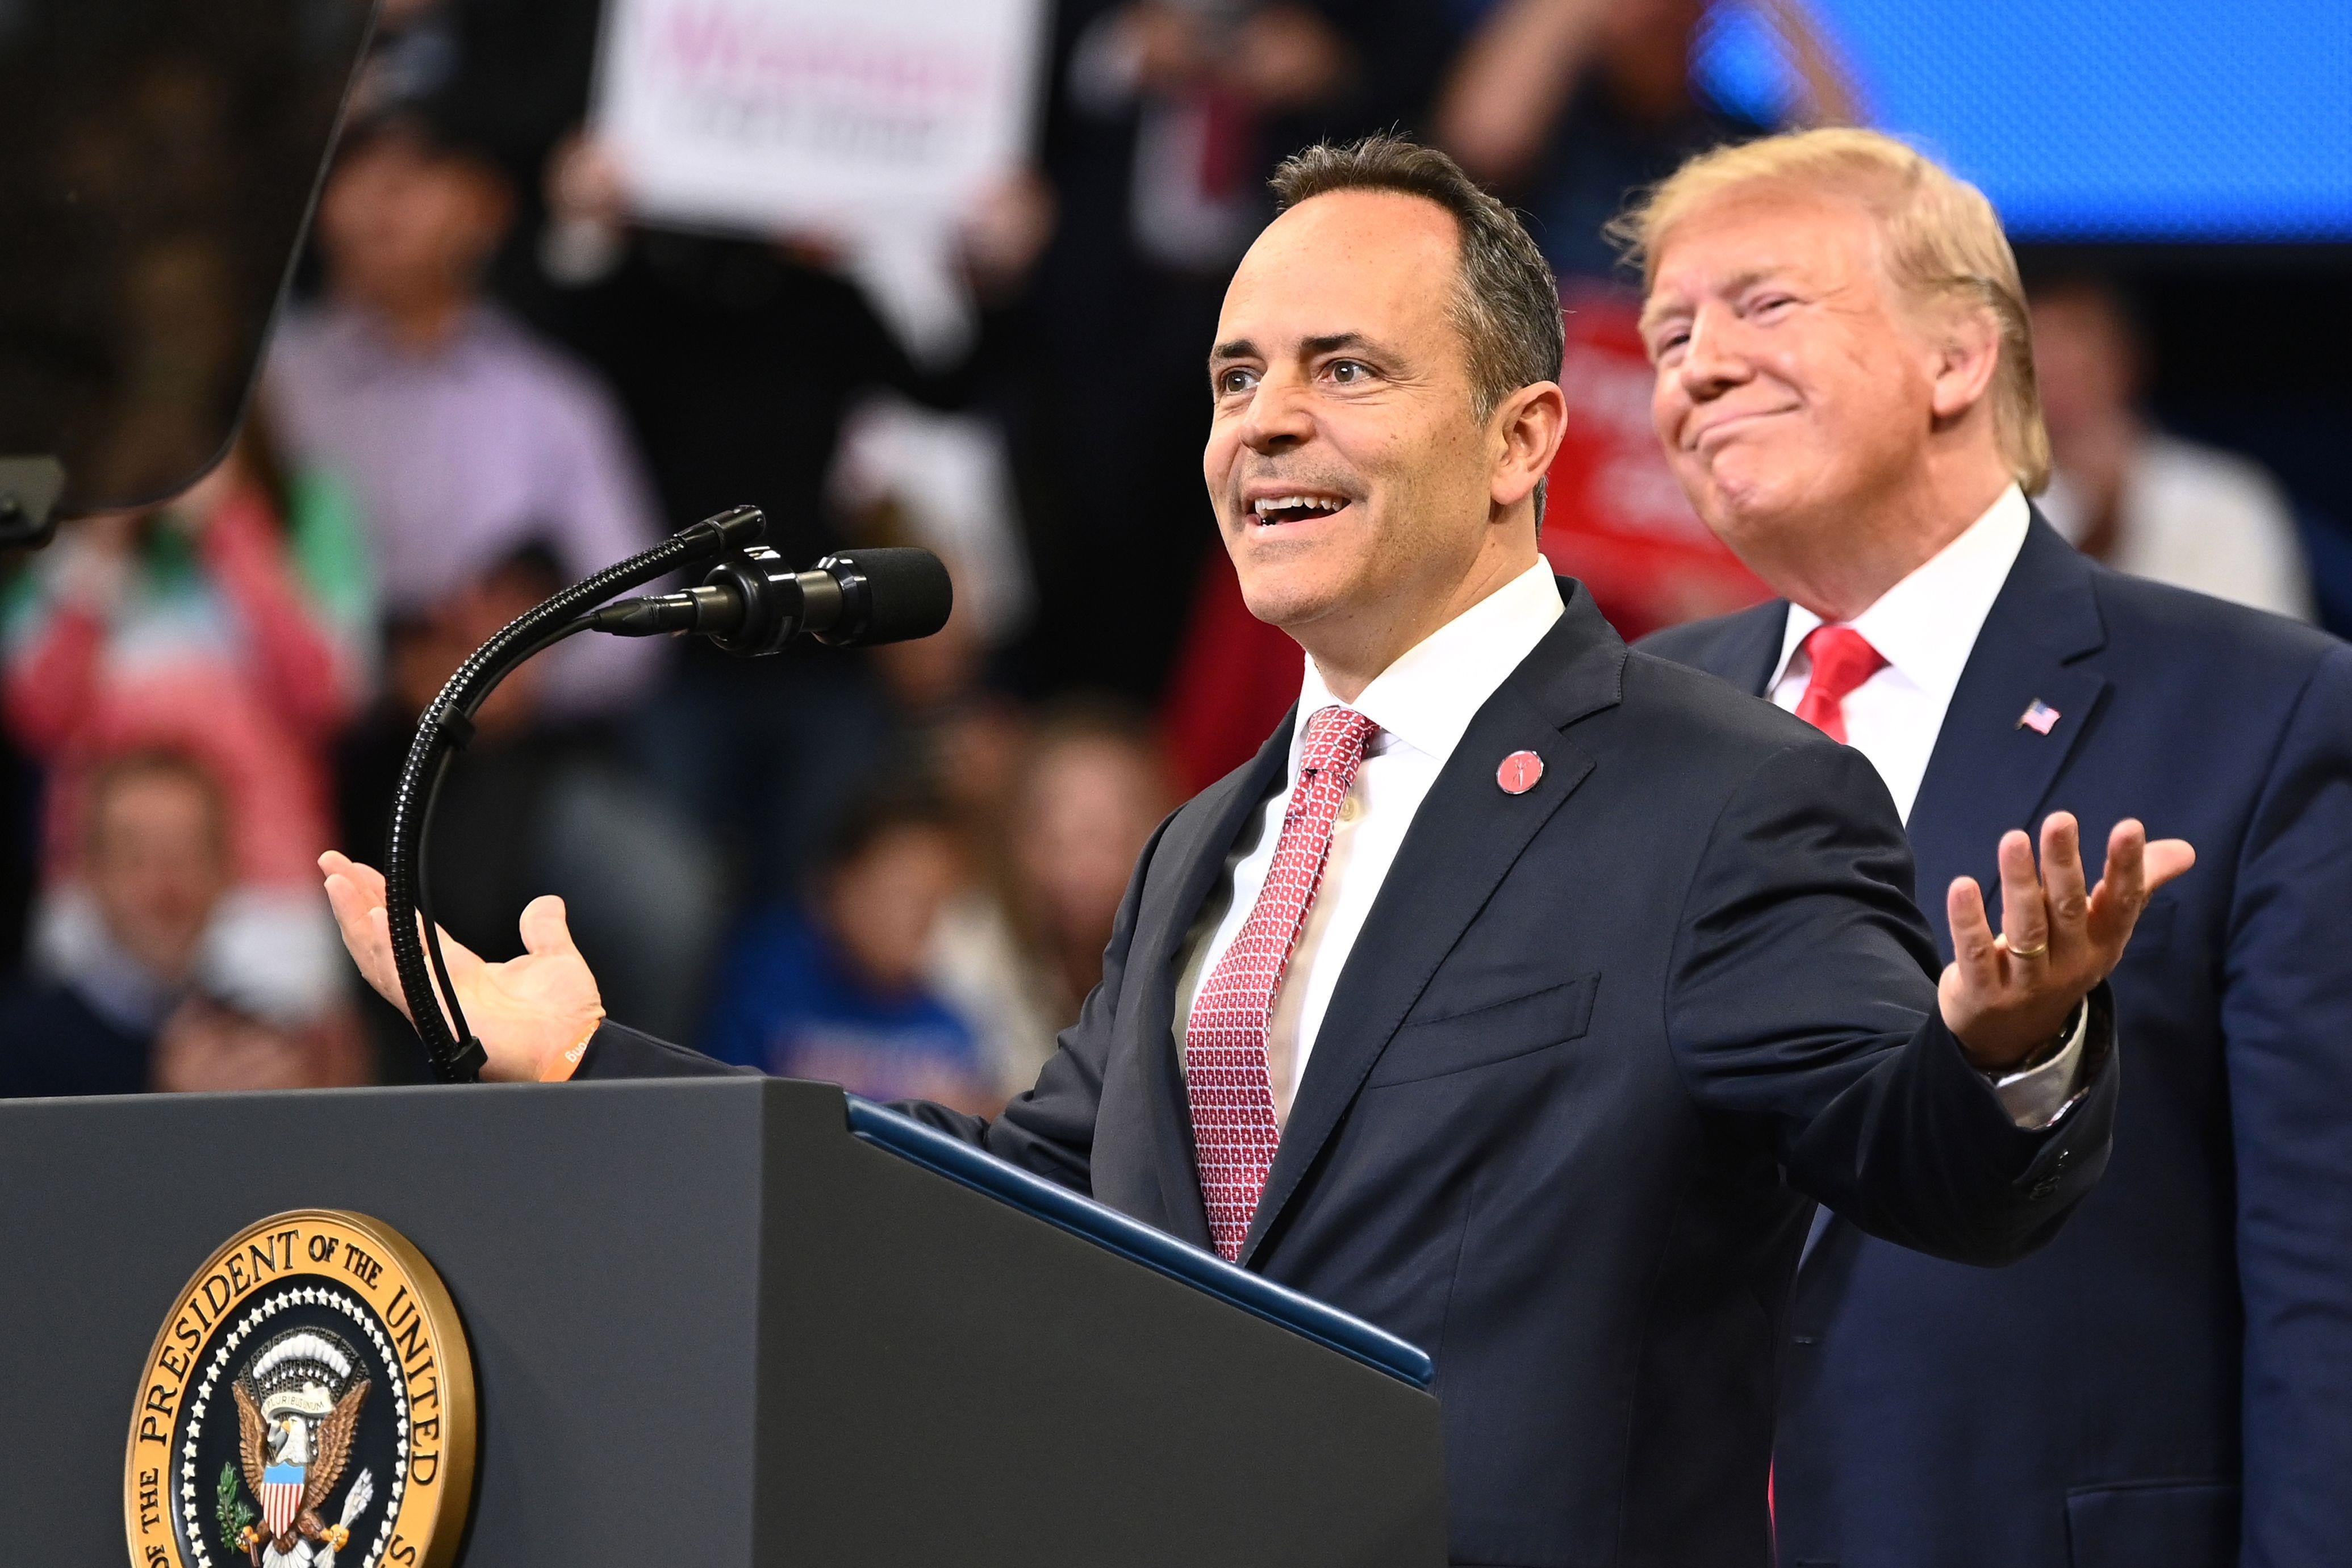 Trump smiles while standing behind Matt Bevin, who is giving a speech at a podium.